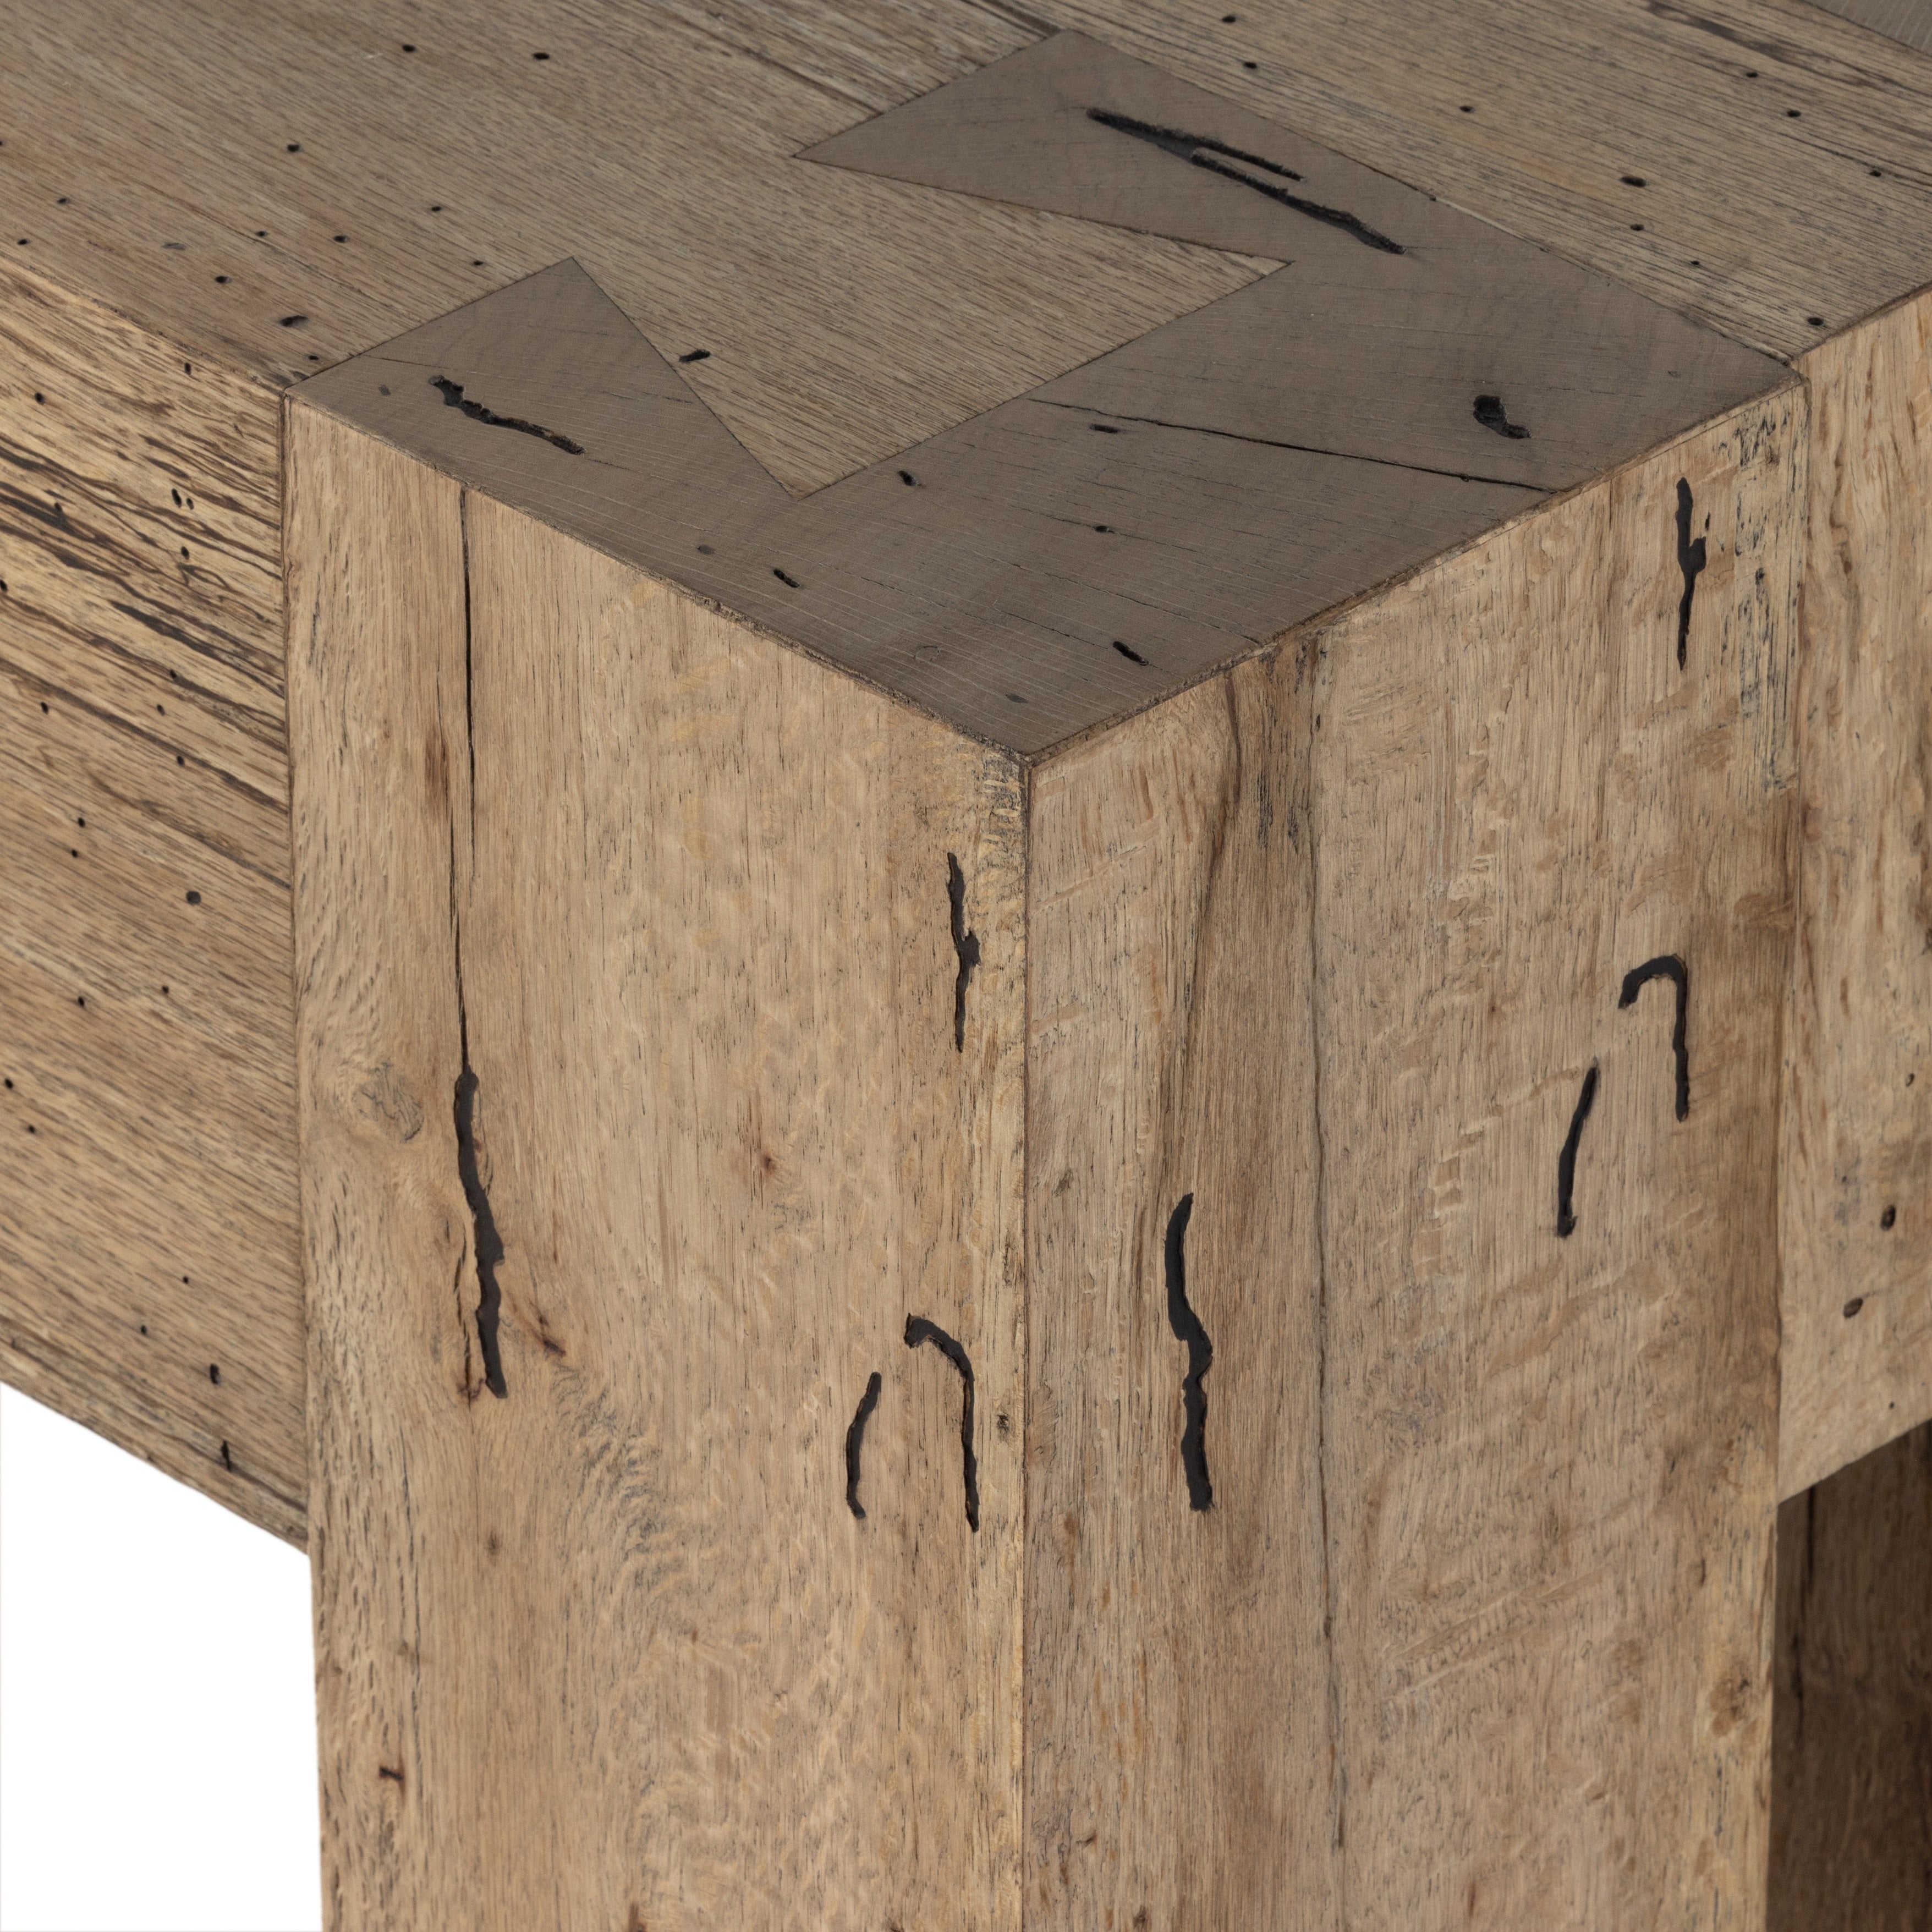 Made from thick-cut oak veneer with a faux rustic finish made to emulate wormwood, this Abaso Rustic Wormwood Oak Console Table features chunky squared legs and dovetail joinery detailing. Amethyst Home provides interior design services, furniture, rugs, and lighting in the Des Moines metro area.